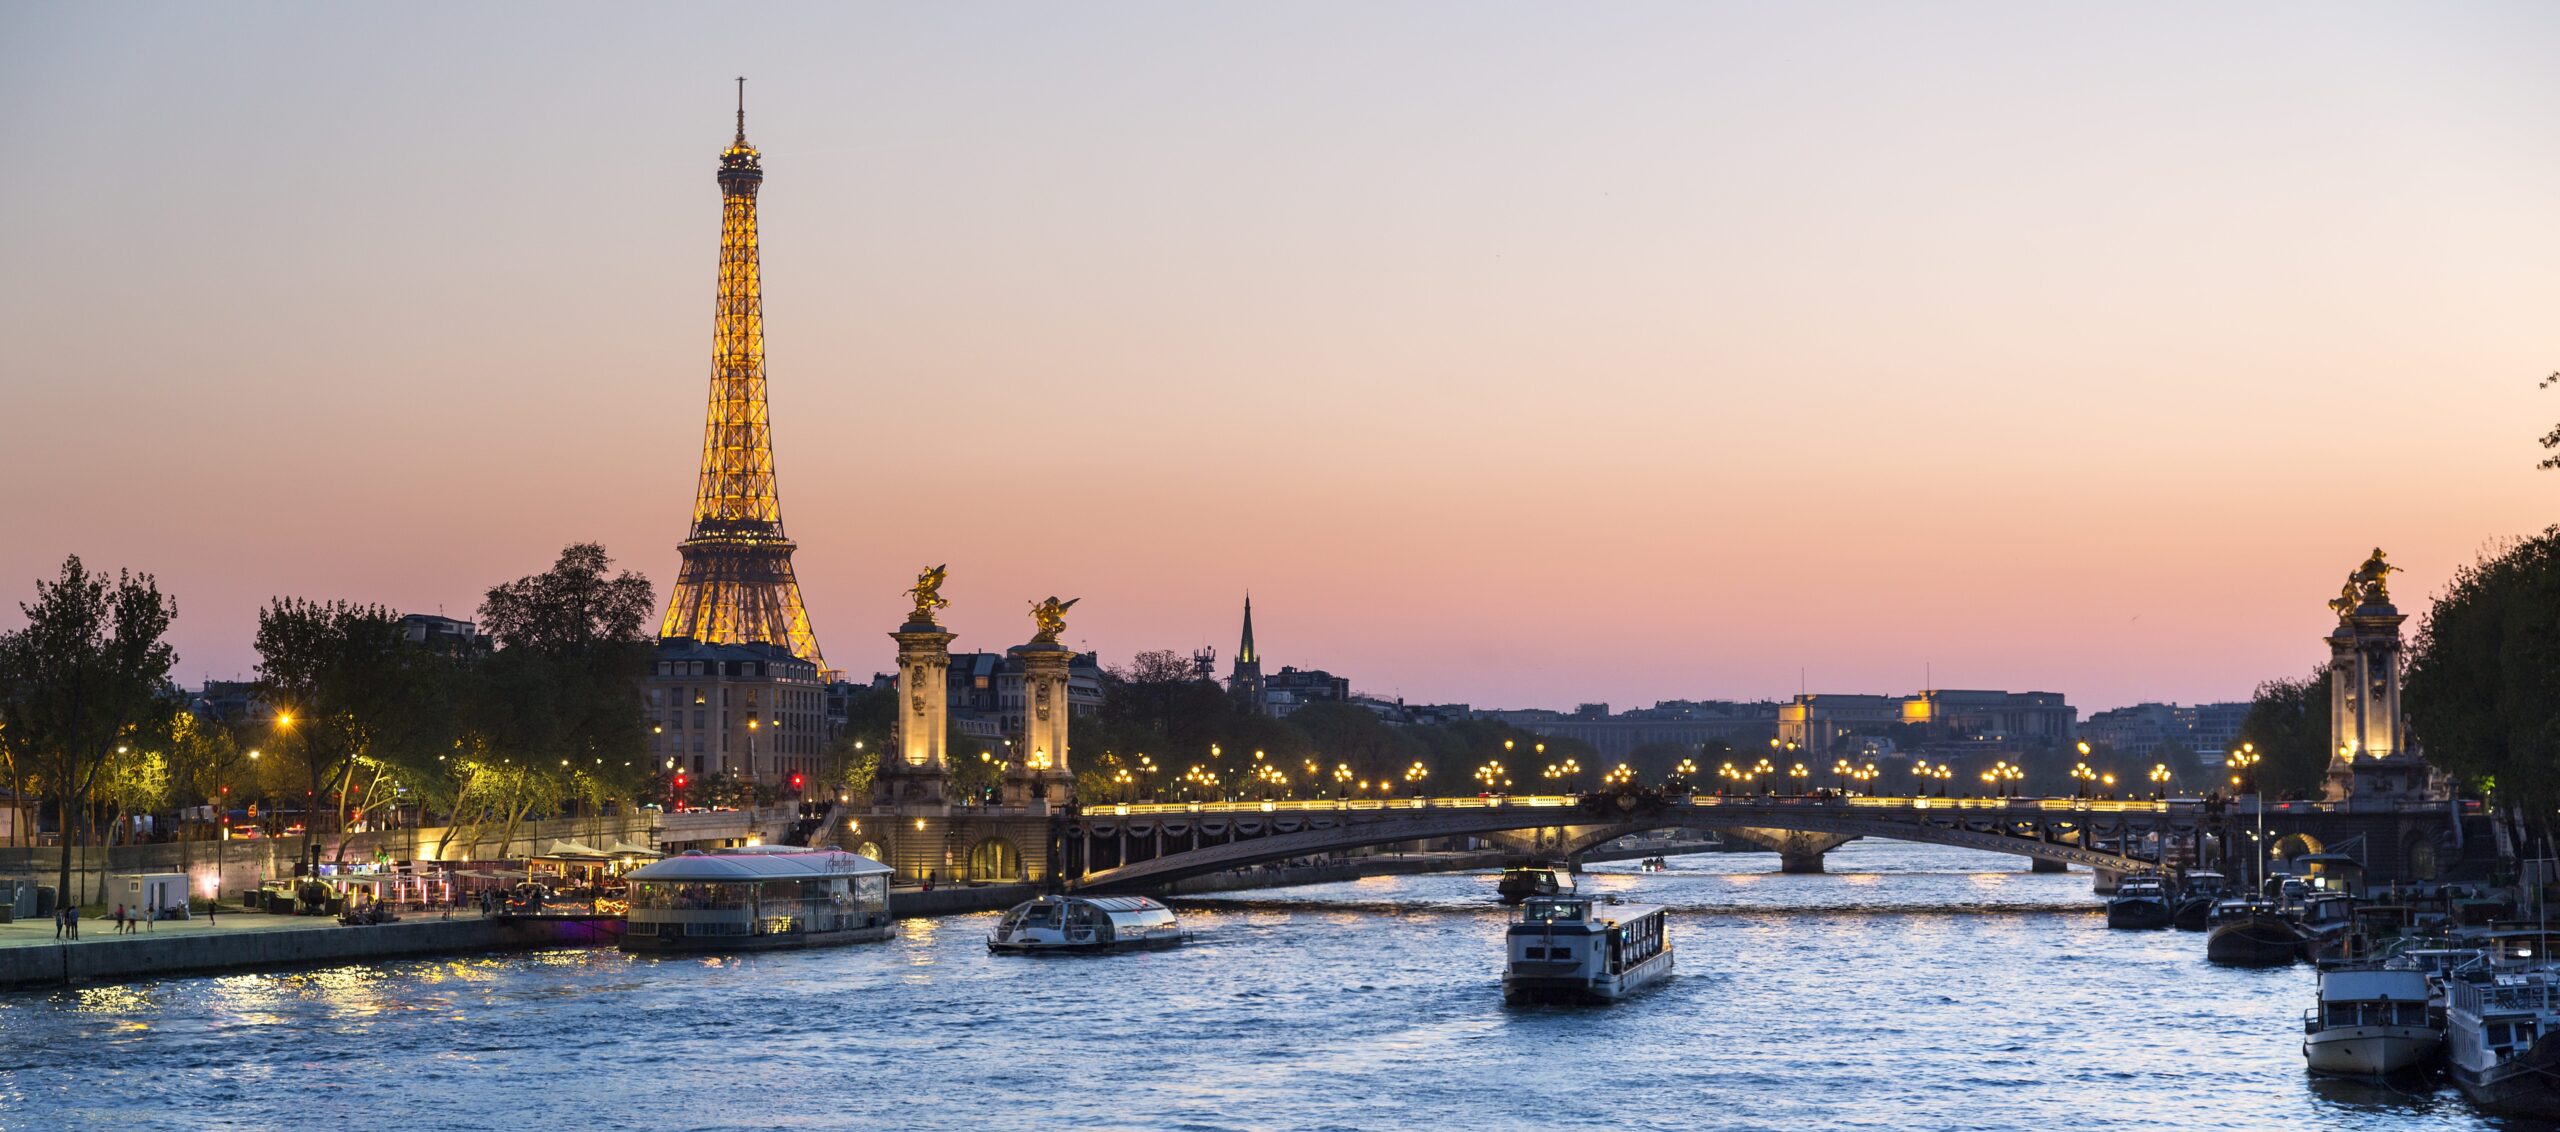 Paris, traffic on the Seine river at sunset, with Eiffel tower in background